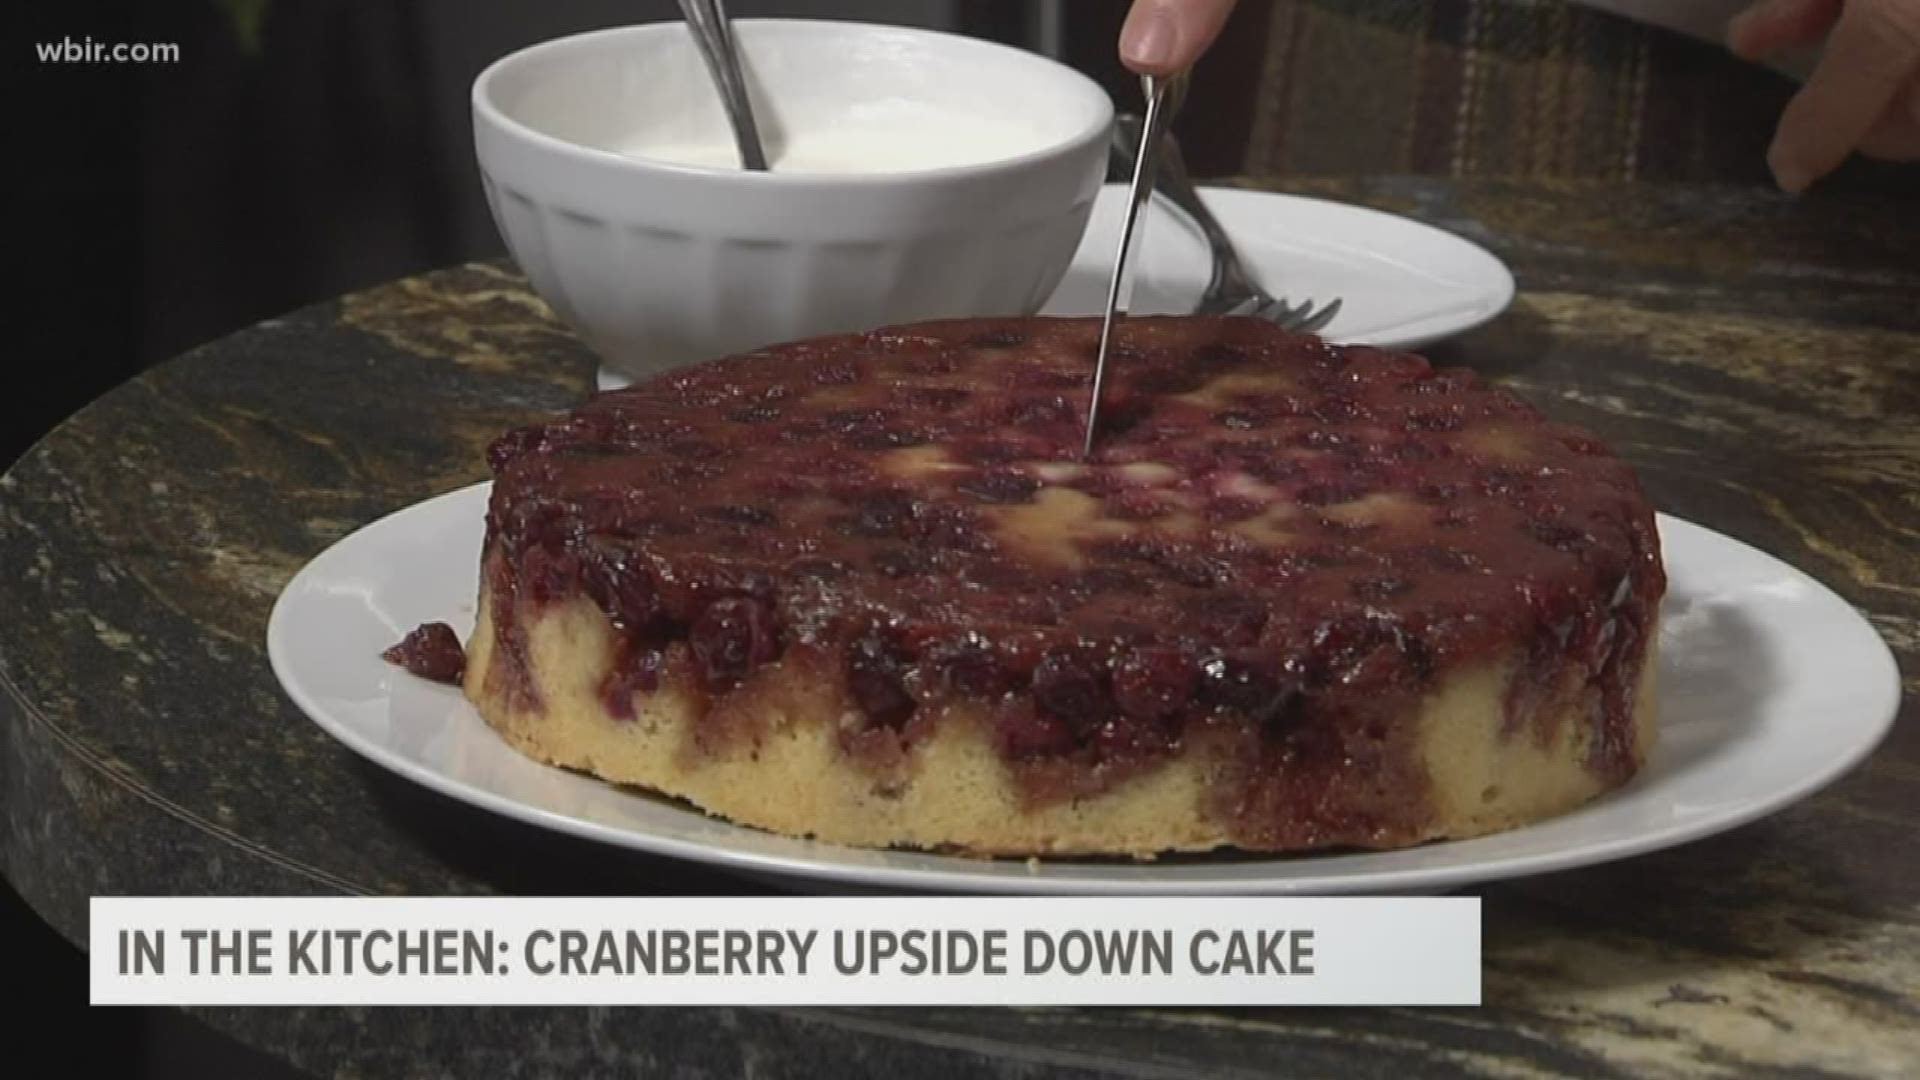 Mahasti Vafaie from Tomato Head joins us in the kitchen to make Cranberry Upside Down Cake.